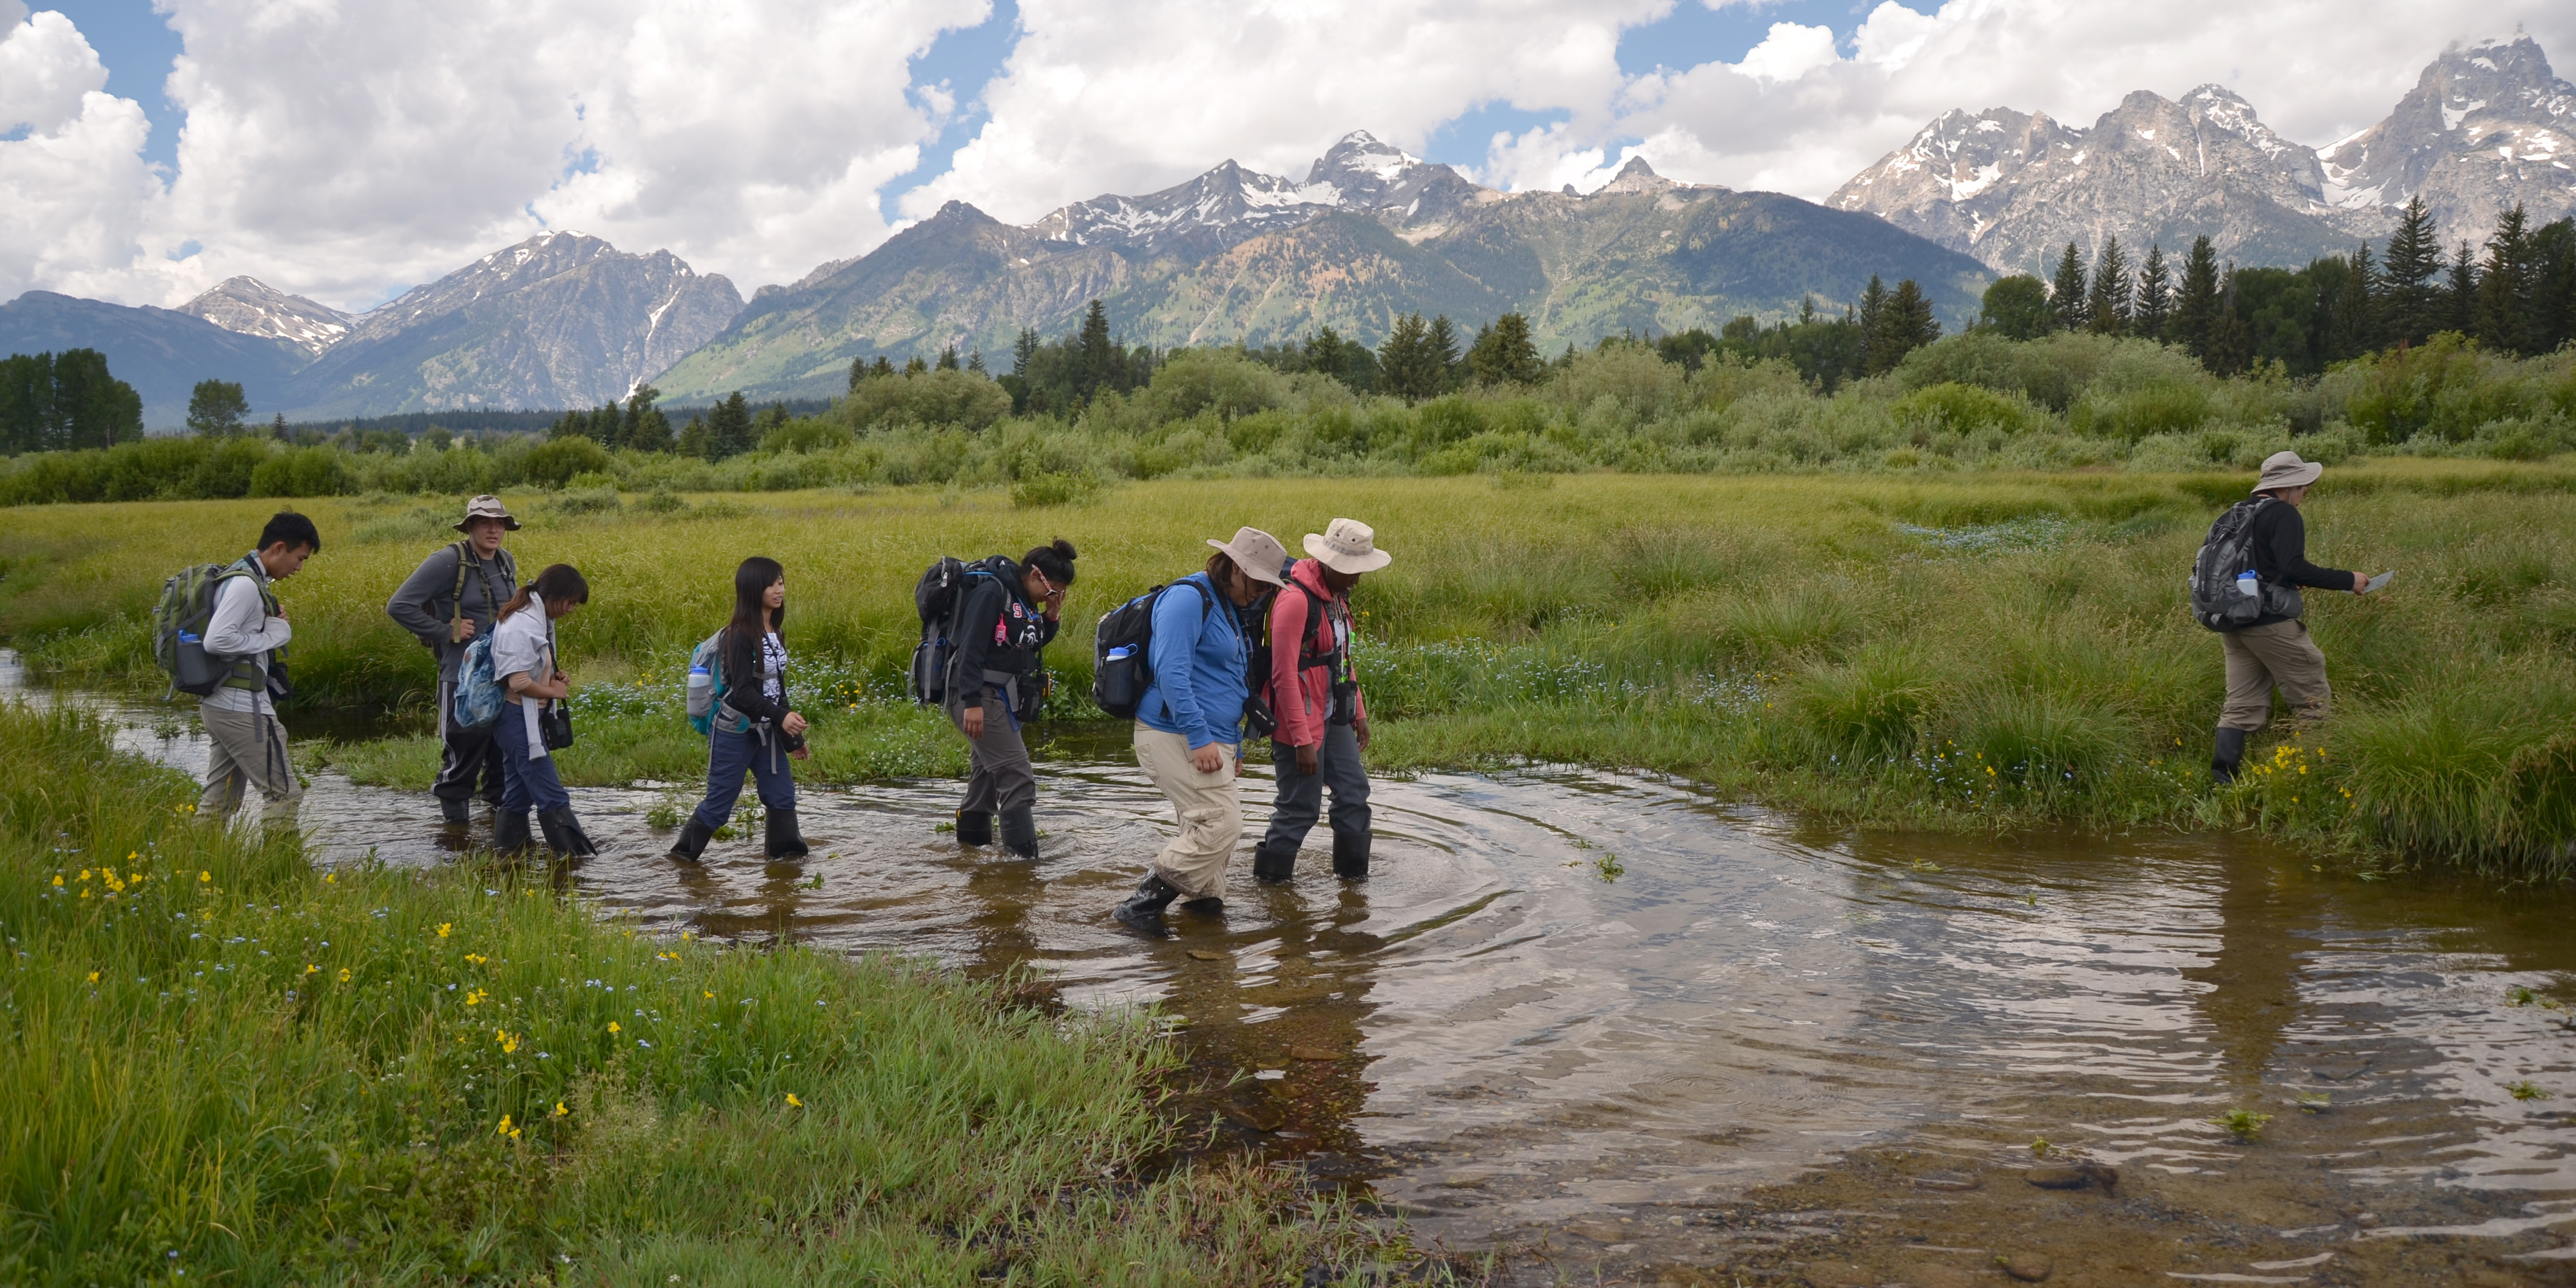 Earthwatch volunteers work and learn alongside leading scientists in stunning natural settings